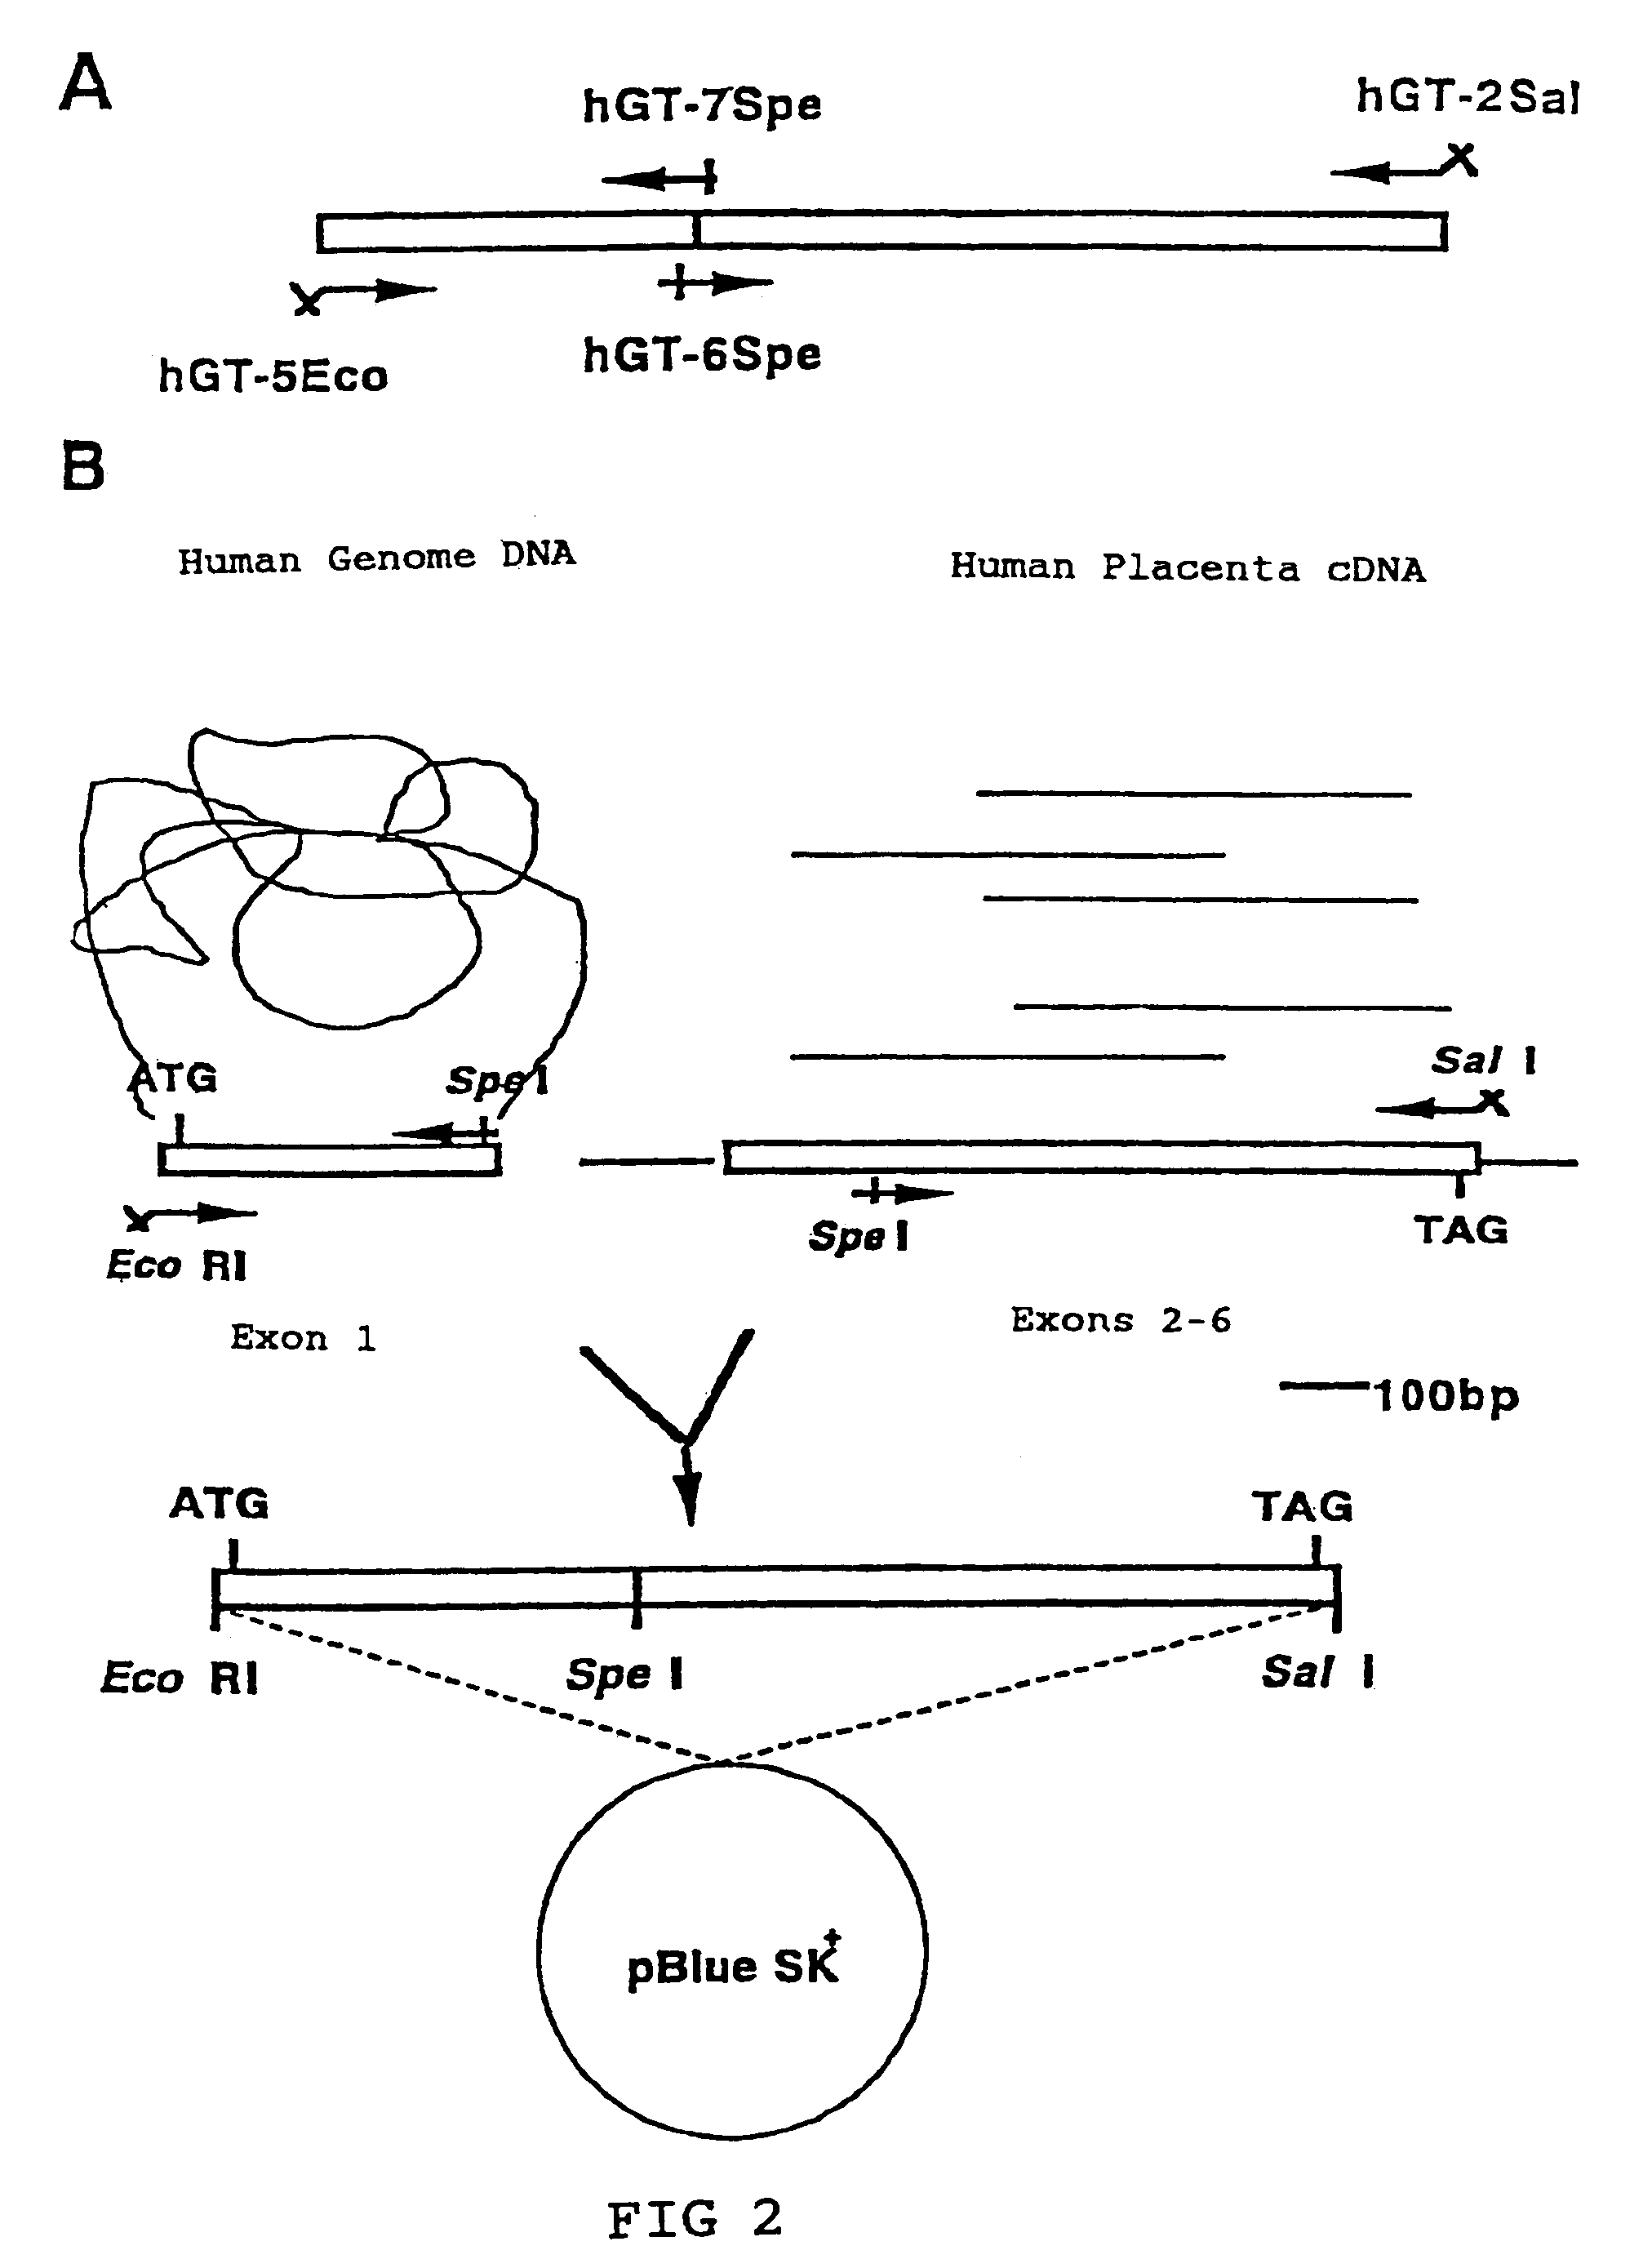 Method for manufacturing glycoproteins having human-type glycosylation